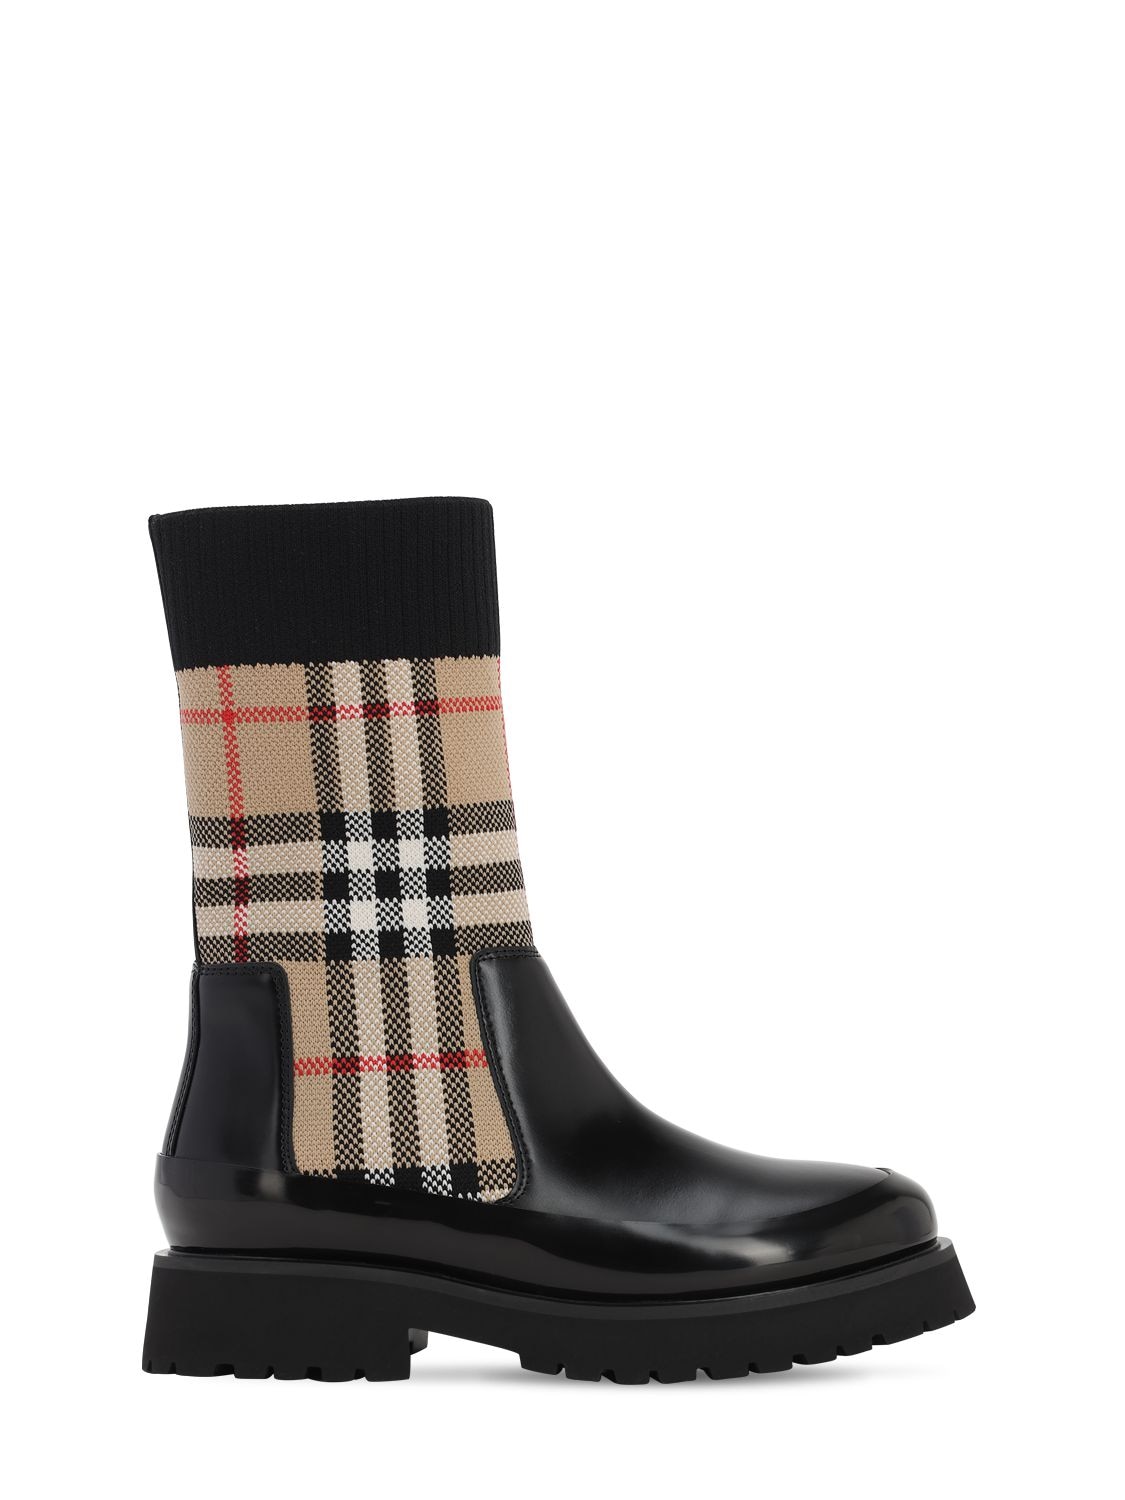 BURBERRY CHECK LEATHER & RUBBER BOOTS,71I1US013-QTCWMJY1